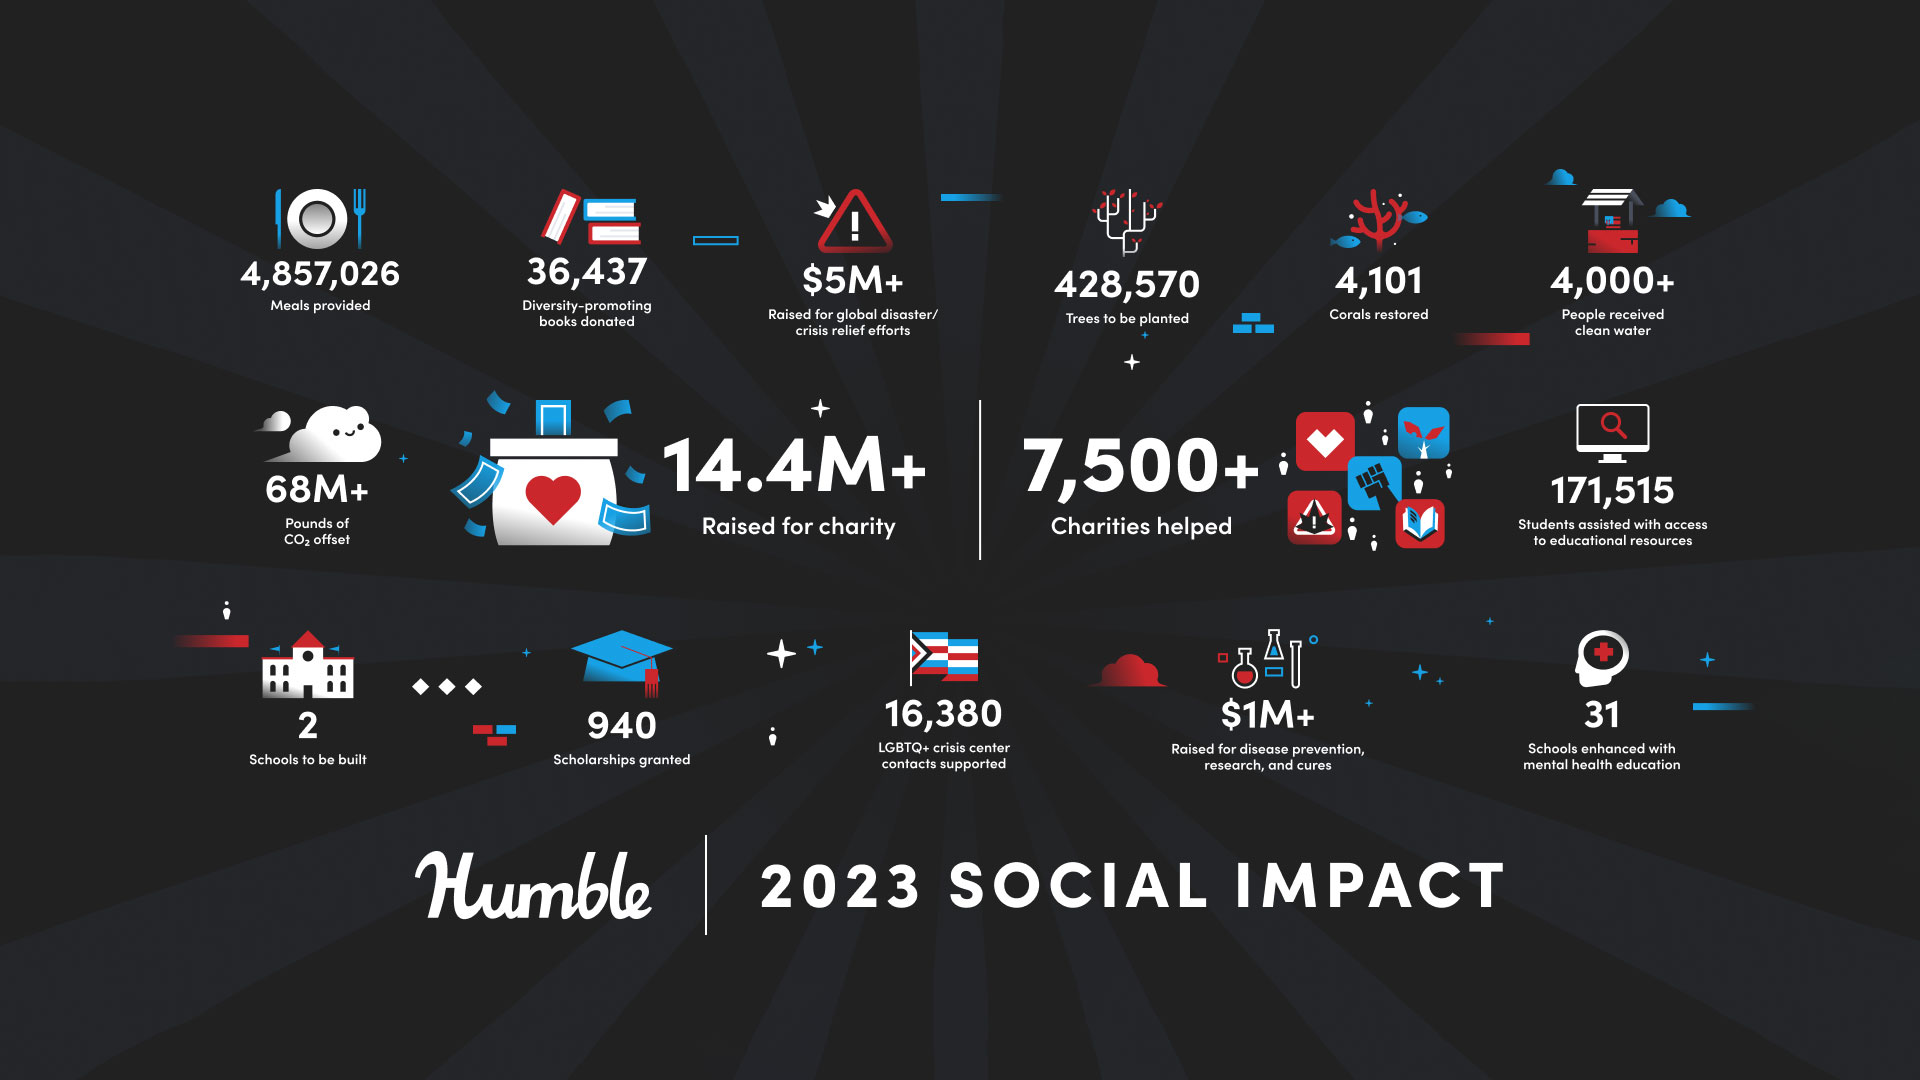 Humble Bundle has raised over $250 million for charity